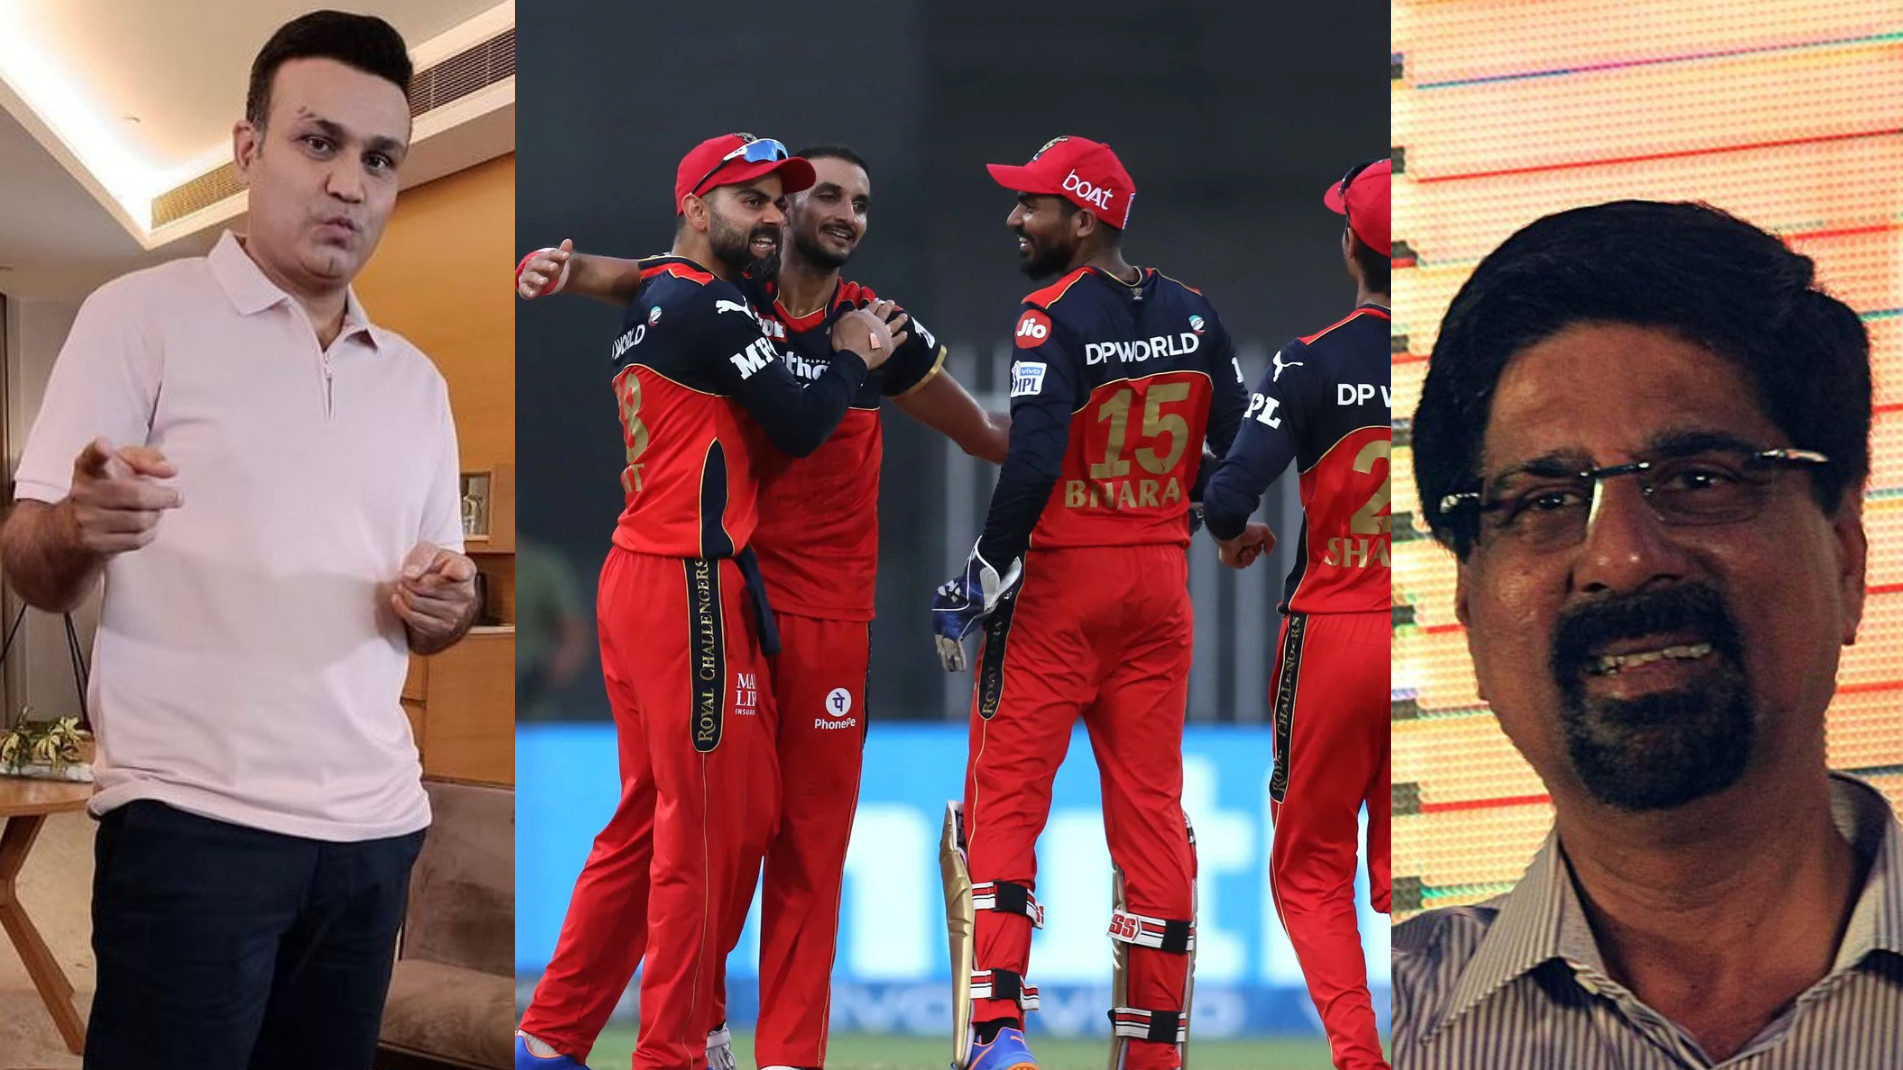 IPL 2021: Cricket fraternity lauds RCB as they qualify for playoffs after beating PBKS by 6 runs